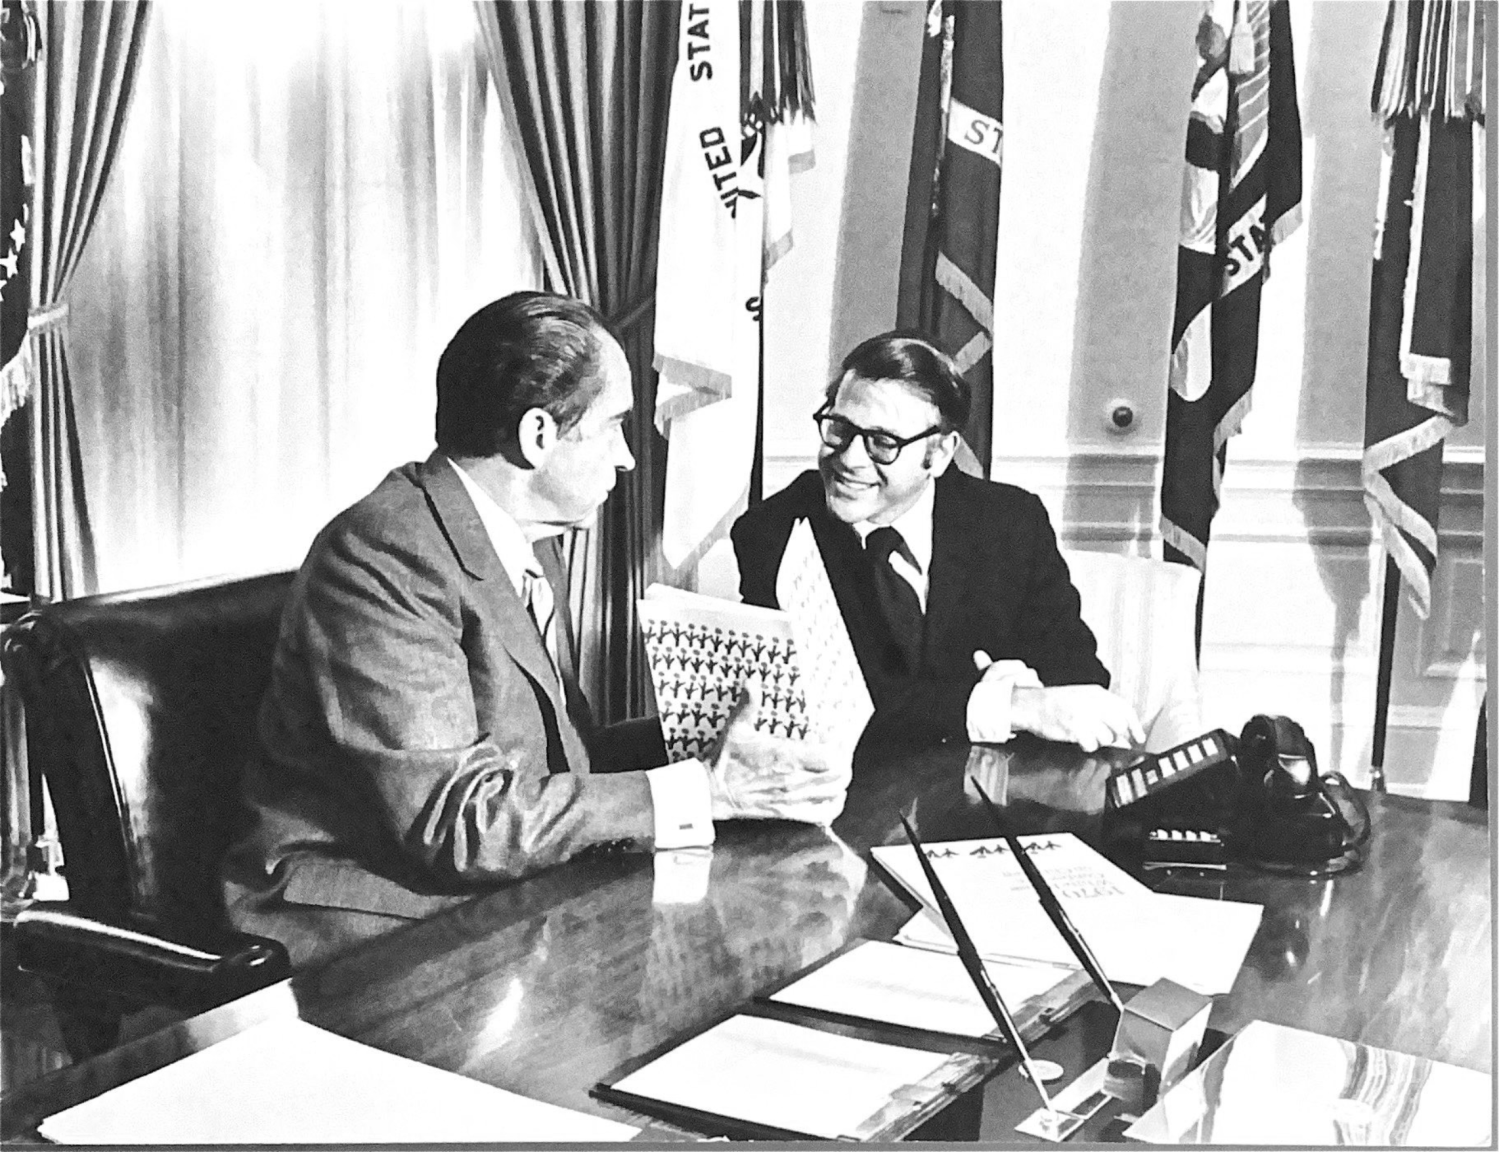 Steve Hess and President Nixon in the Oval Office discuss the White House Conference on Youth, 1970